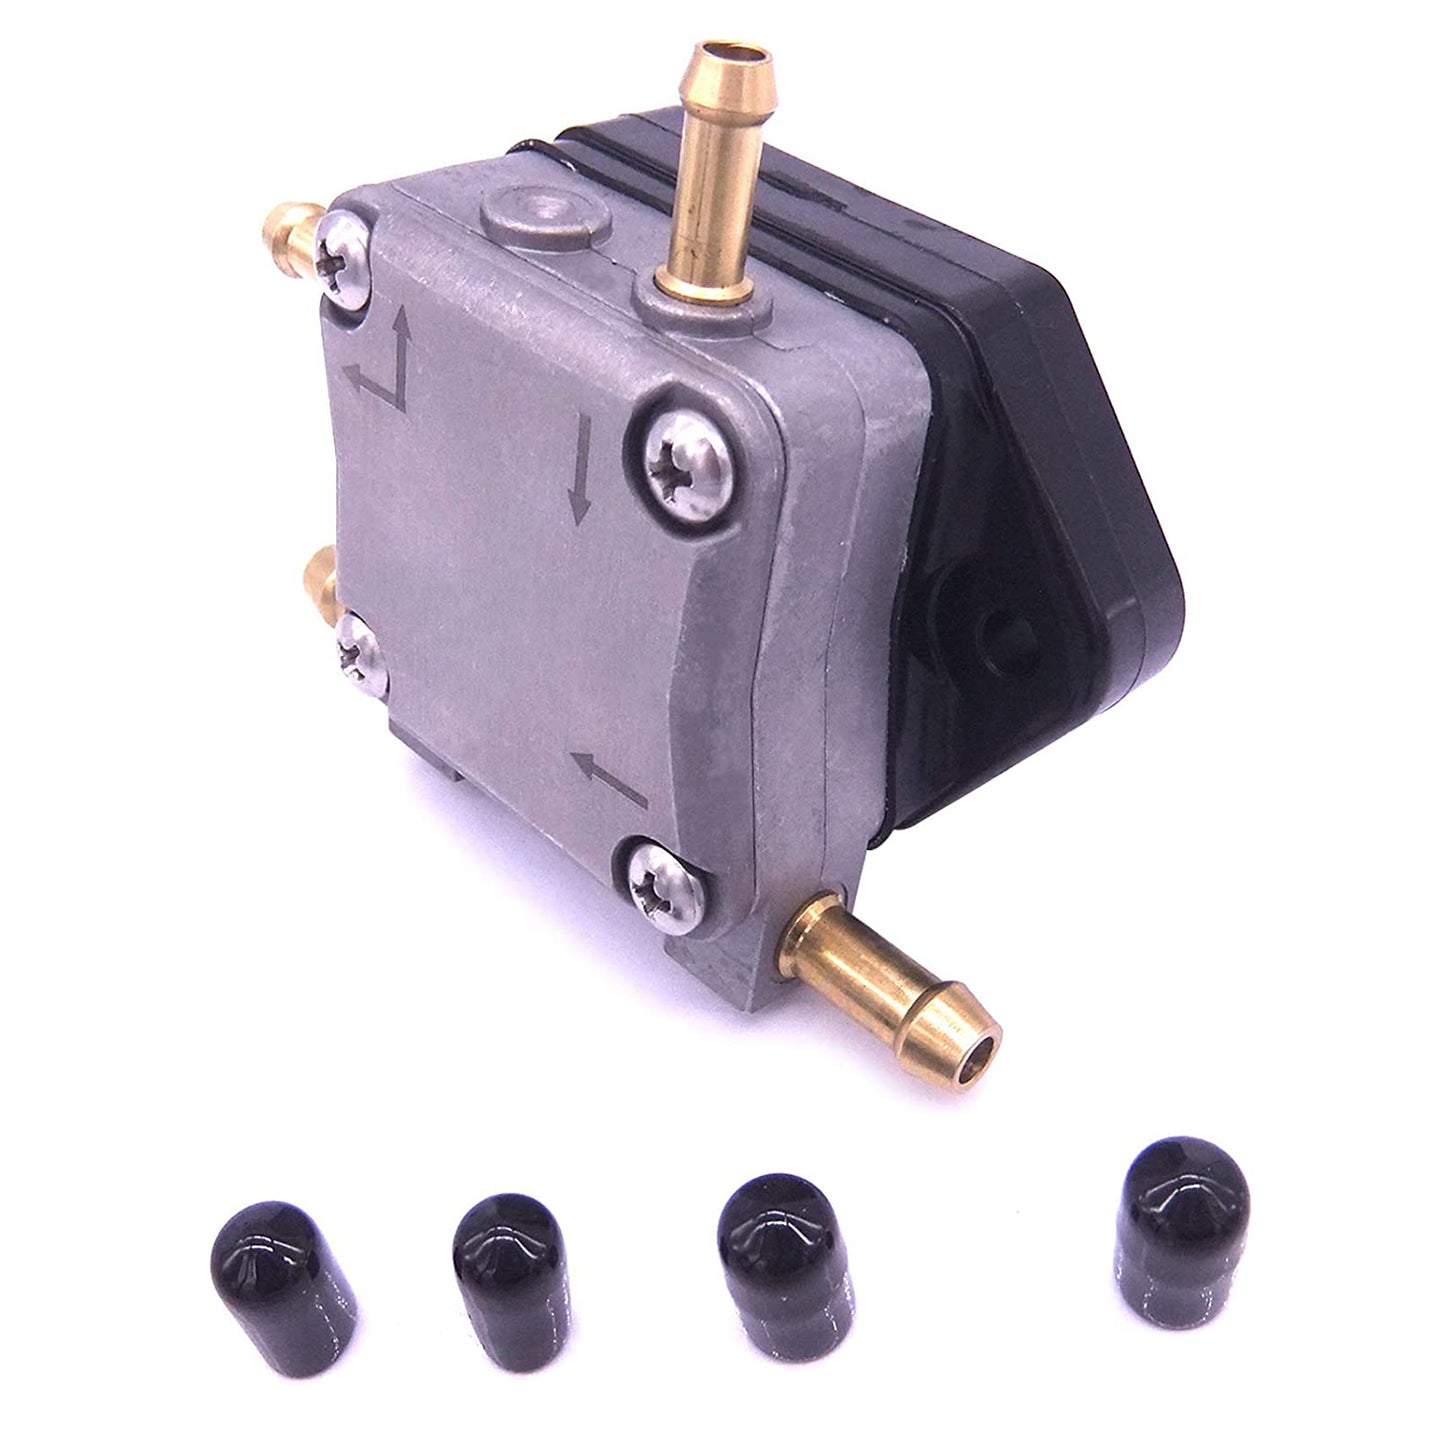 8M0118177 Fuel Pump Compatible with Mercury 30, 40, 50, 60 HP 4 Stroke Outboard Engine